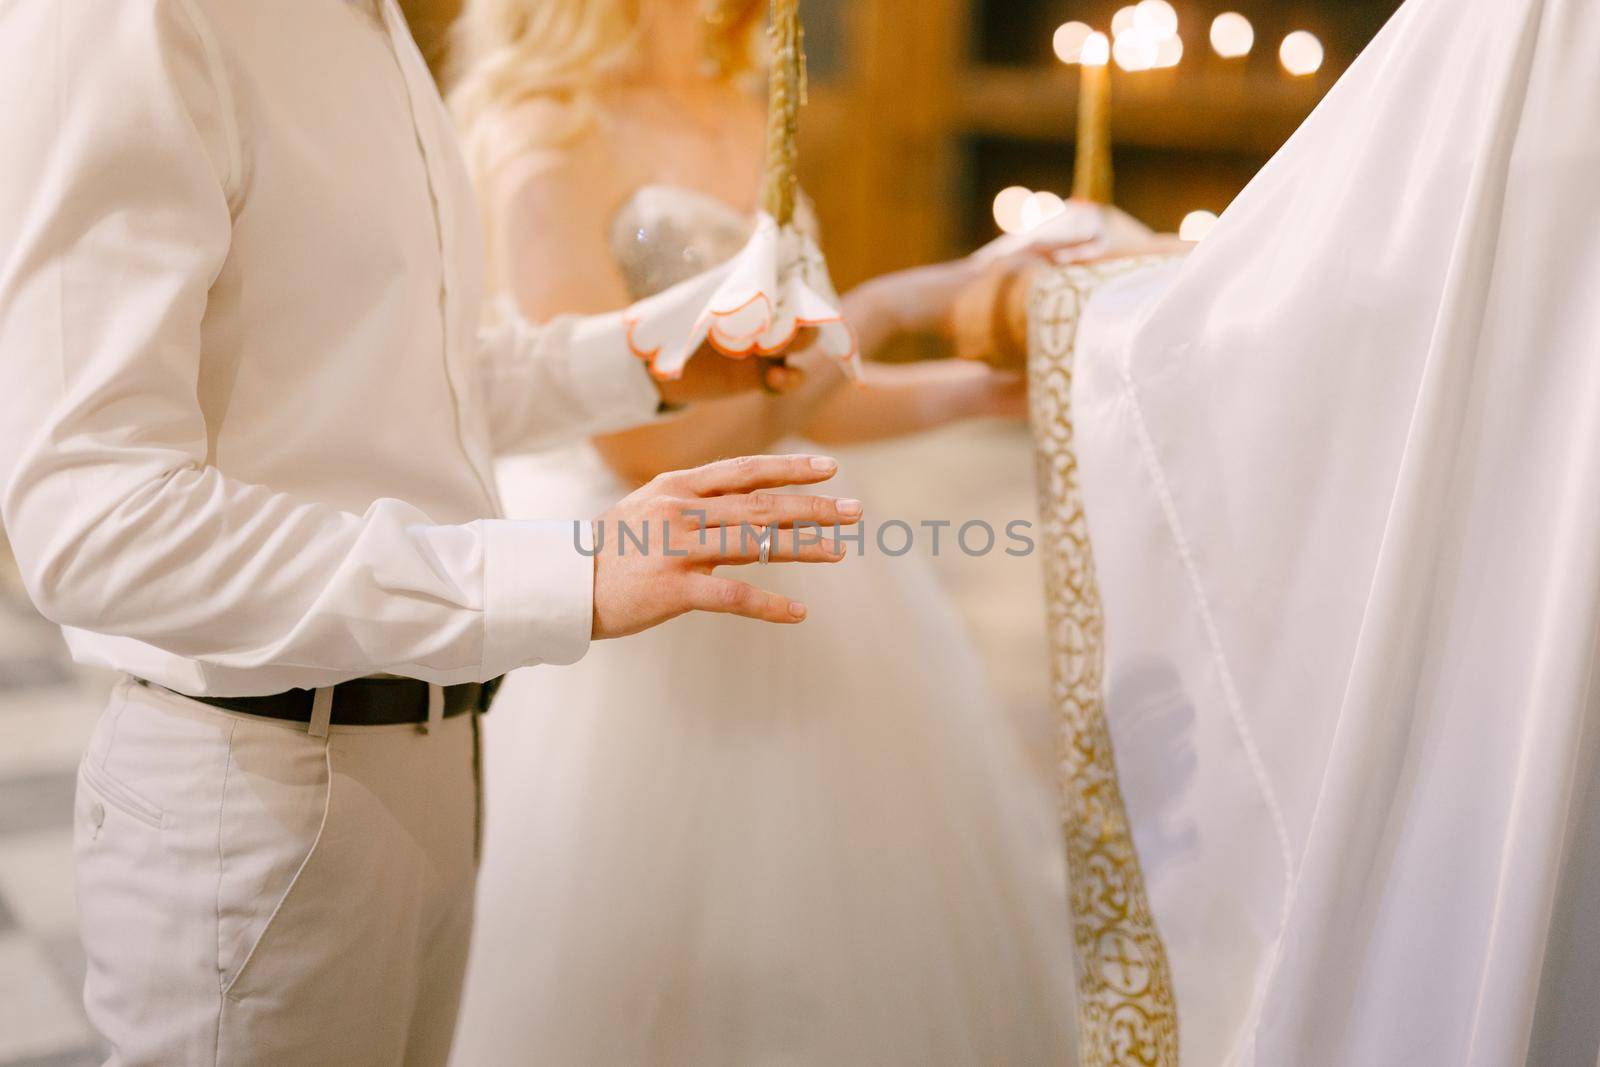 A priest in a white habit marrying the bride and groom in the church of St. Nicholas in Kotor . High quality photo